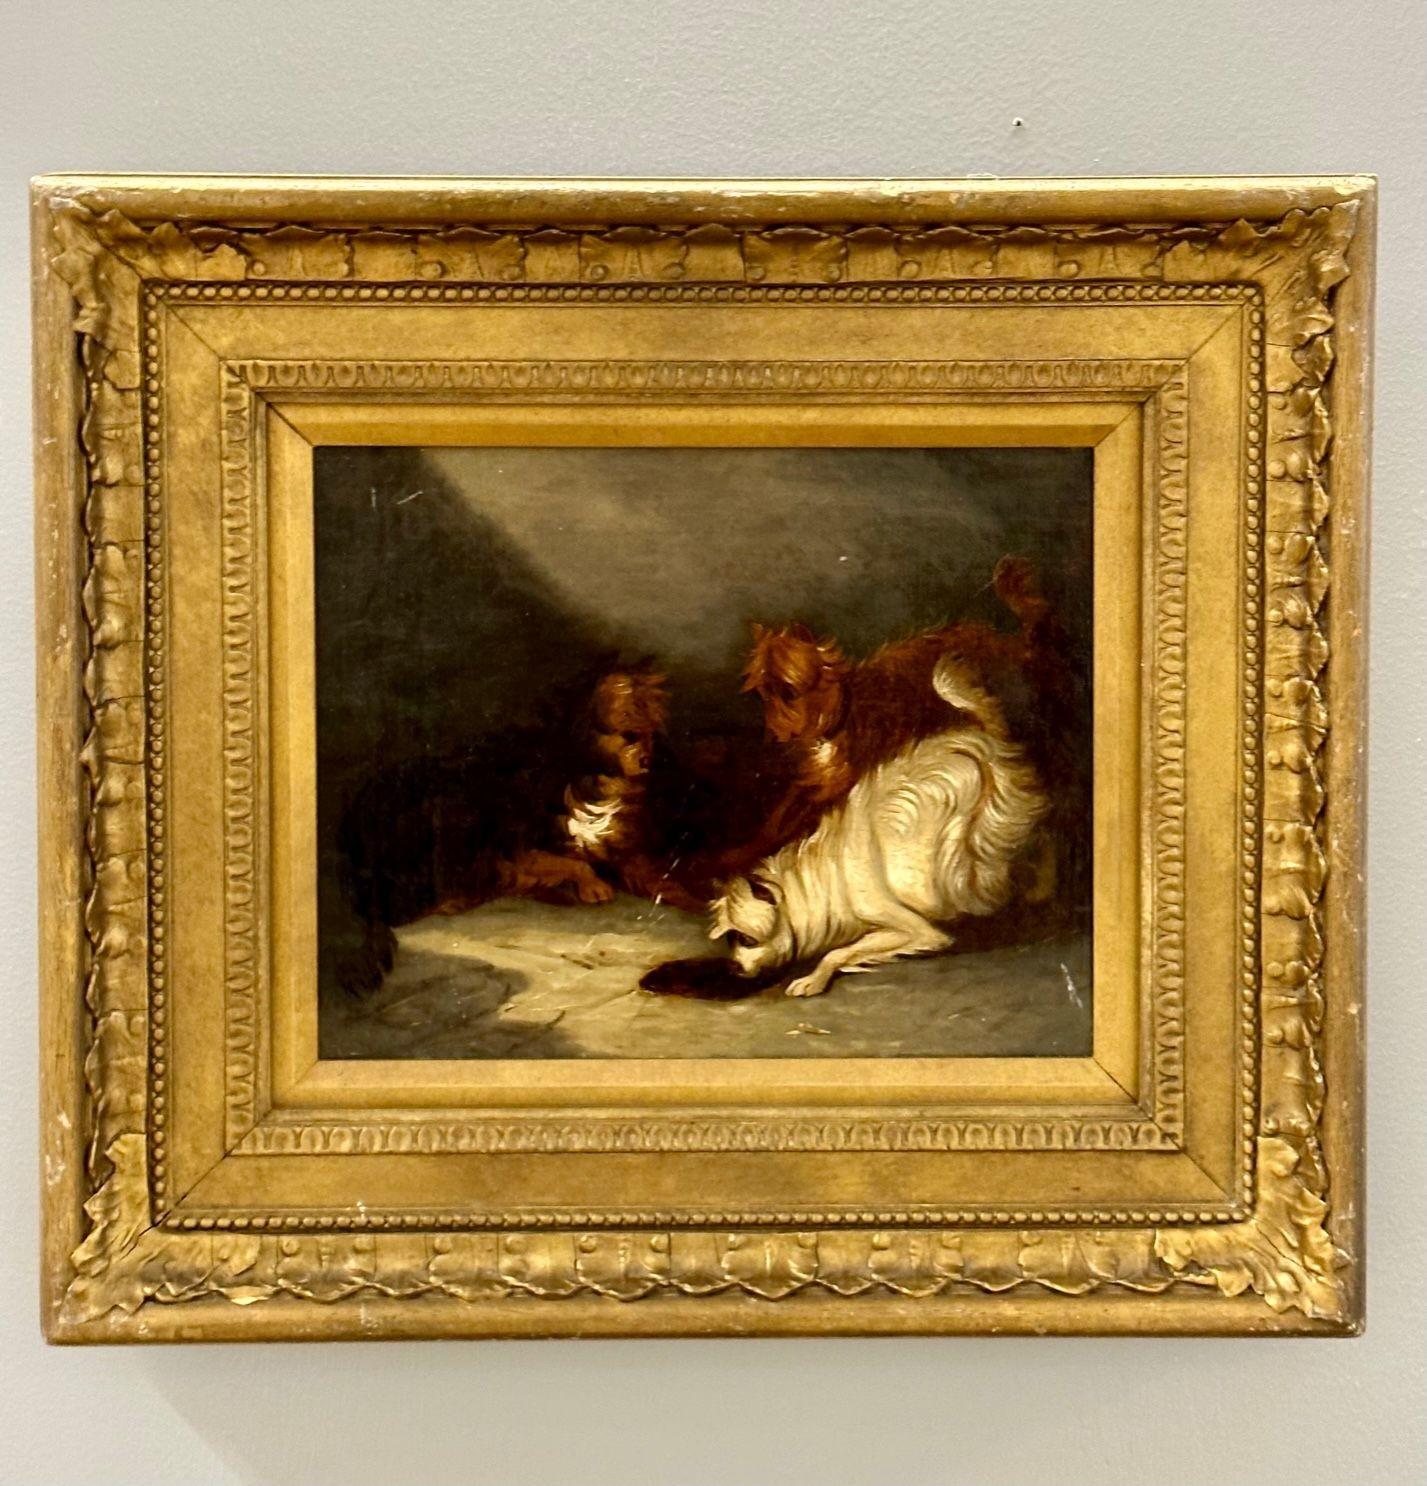 19th Century Oil on Canvas, Dogs Ratting, Attributed to Edward Armfield, Giltwood, Framed, Playful Puppies
 
Gorgeous diminutive oil on canvas attributed to British artist, Edward Armfield. Depicting three terriers 'ratting' in a barn. Gilt frame